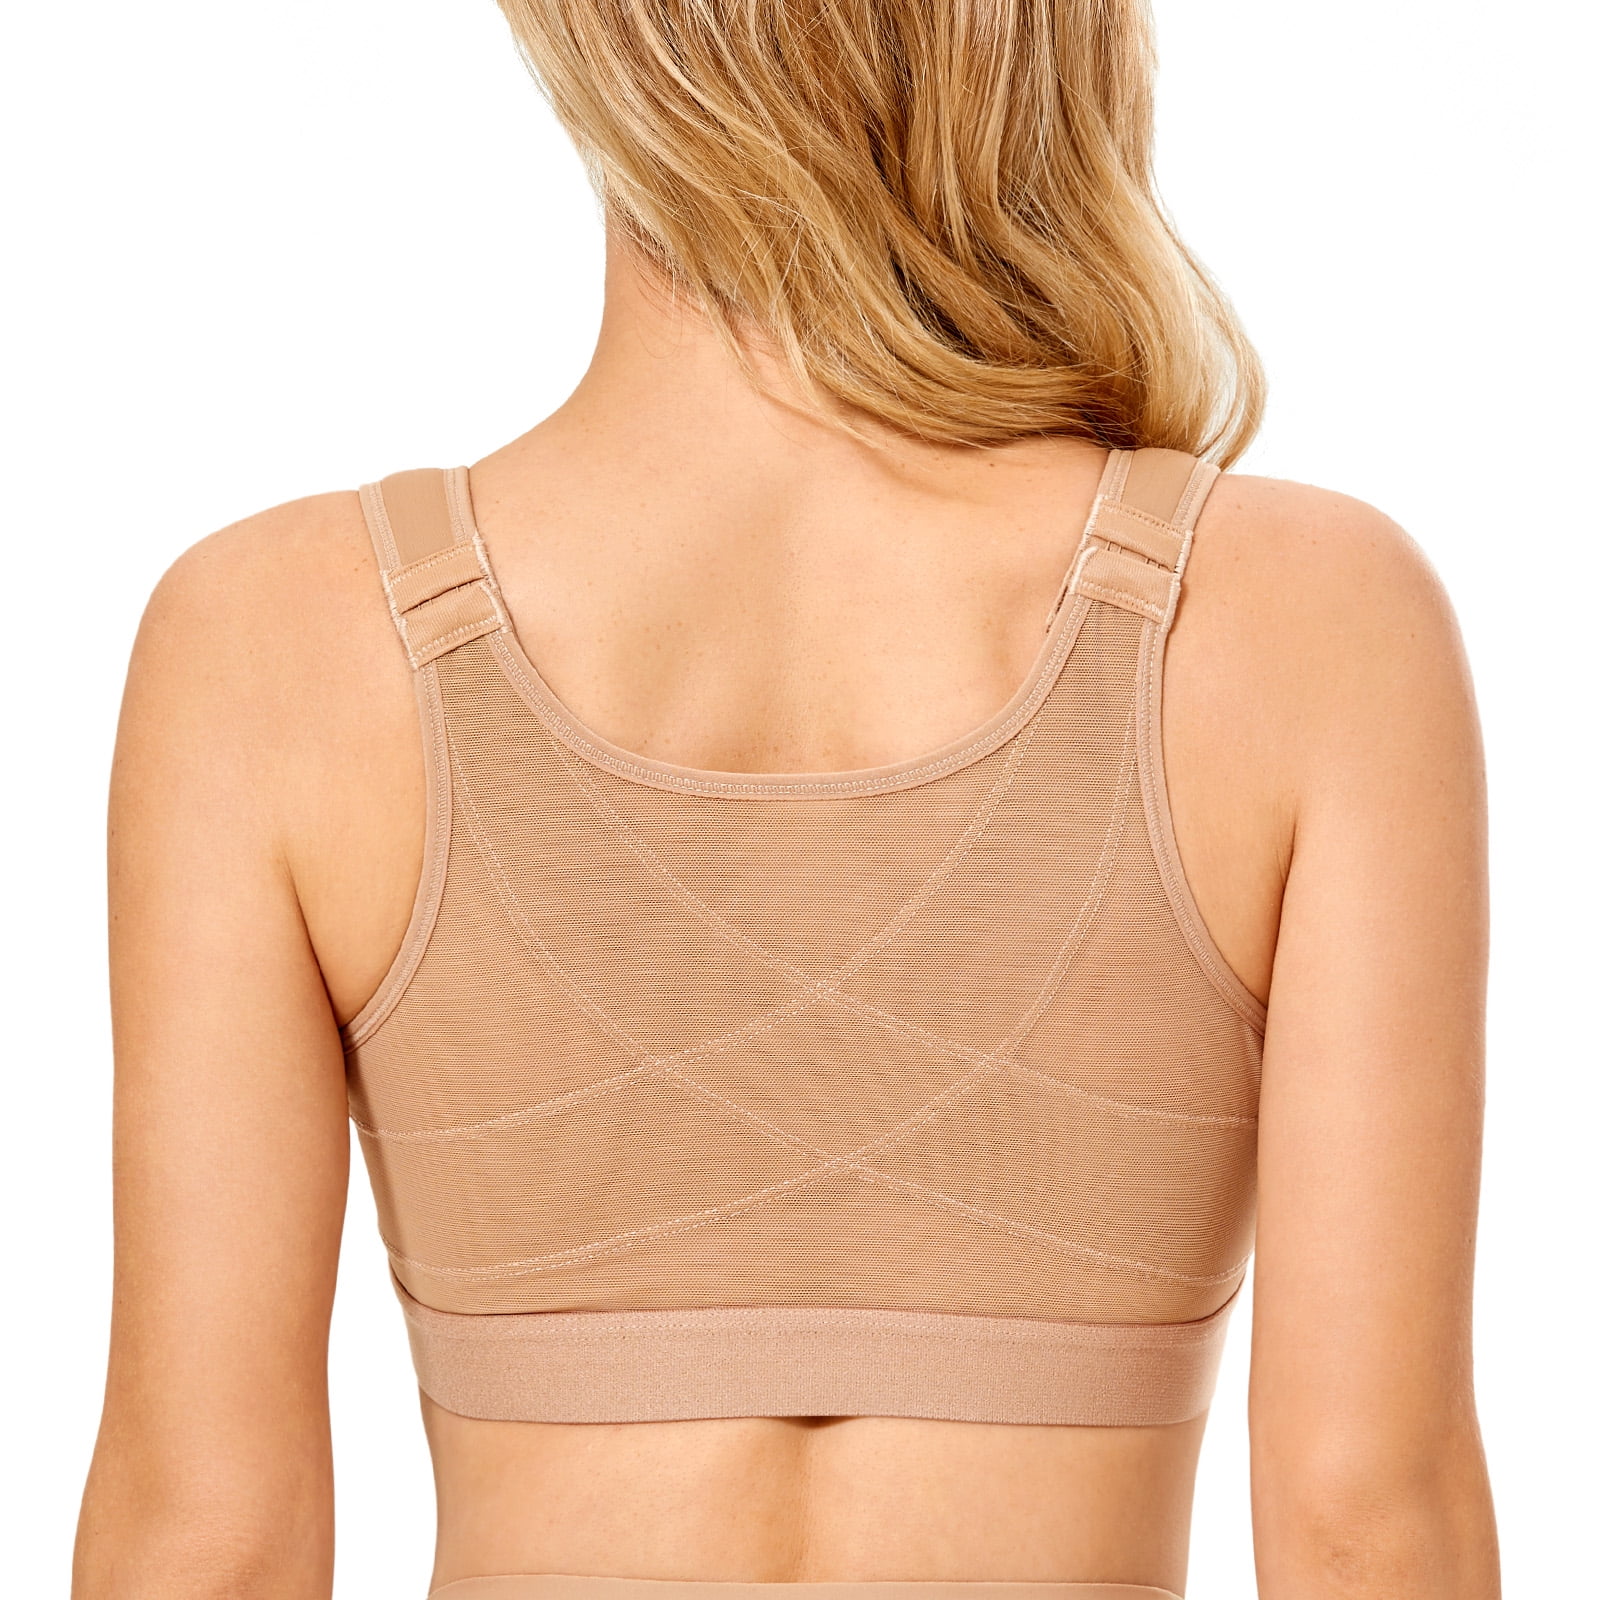 Exclare Women's Front Closure Full Coverage Wirefree Posture Back Everyday  Bra(42G, Black) 